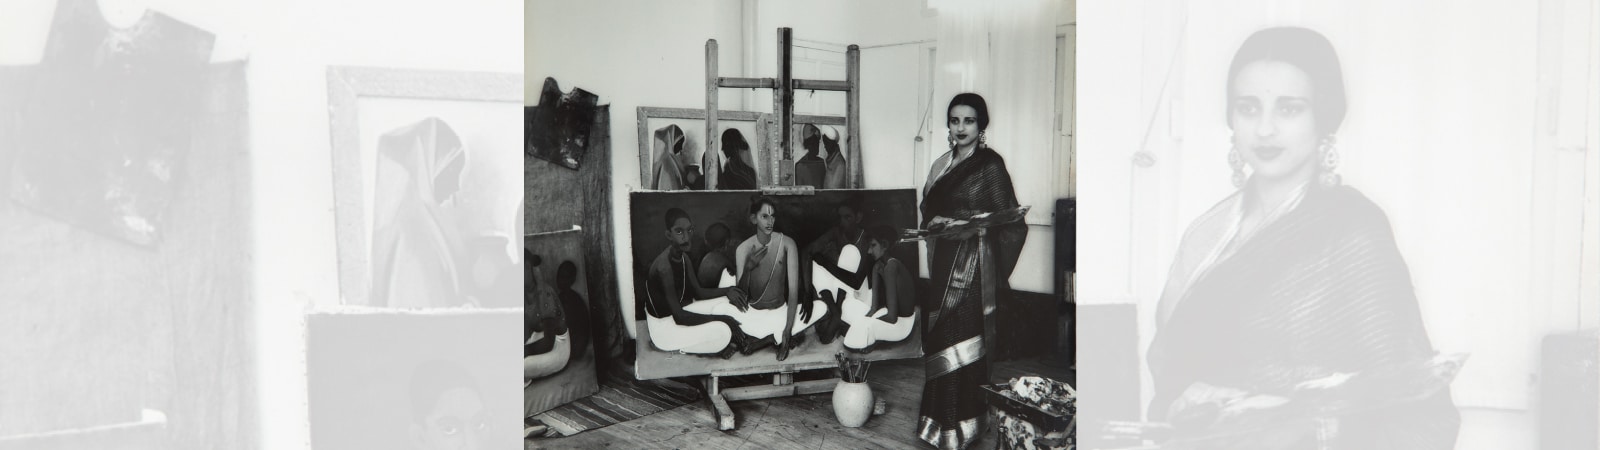 Paintings by Amrita Sher-Gil & S.H. Raza Set New Records for Highest Price Achieved by Indian Artists